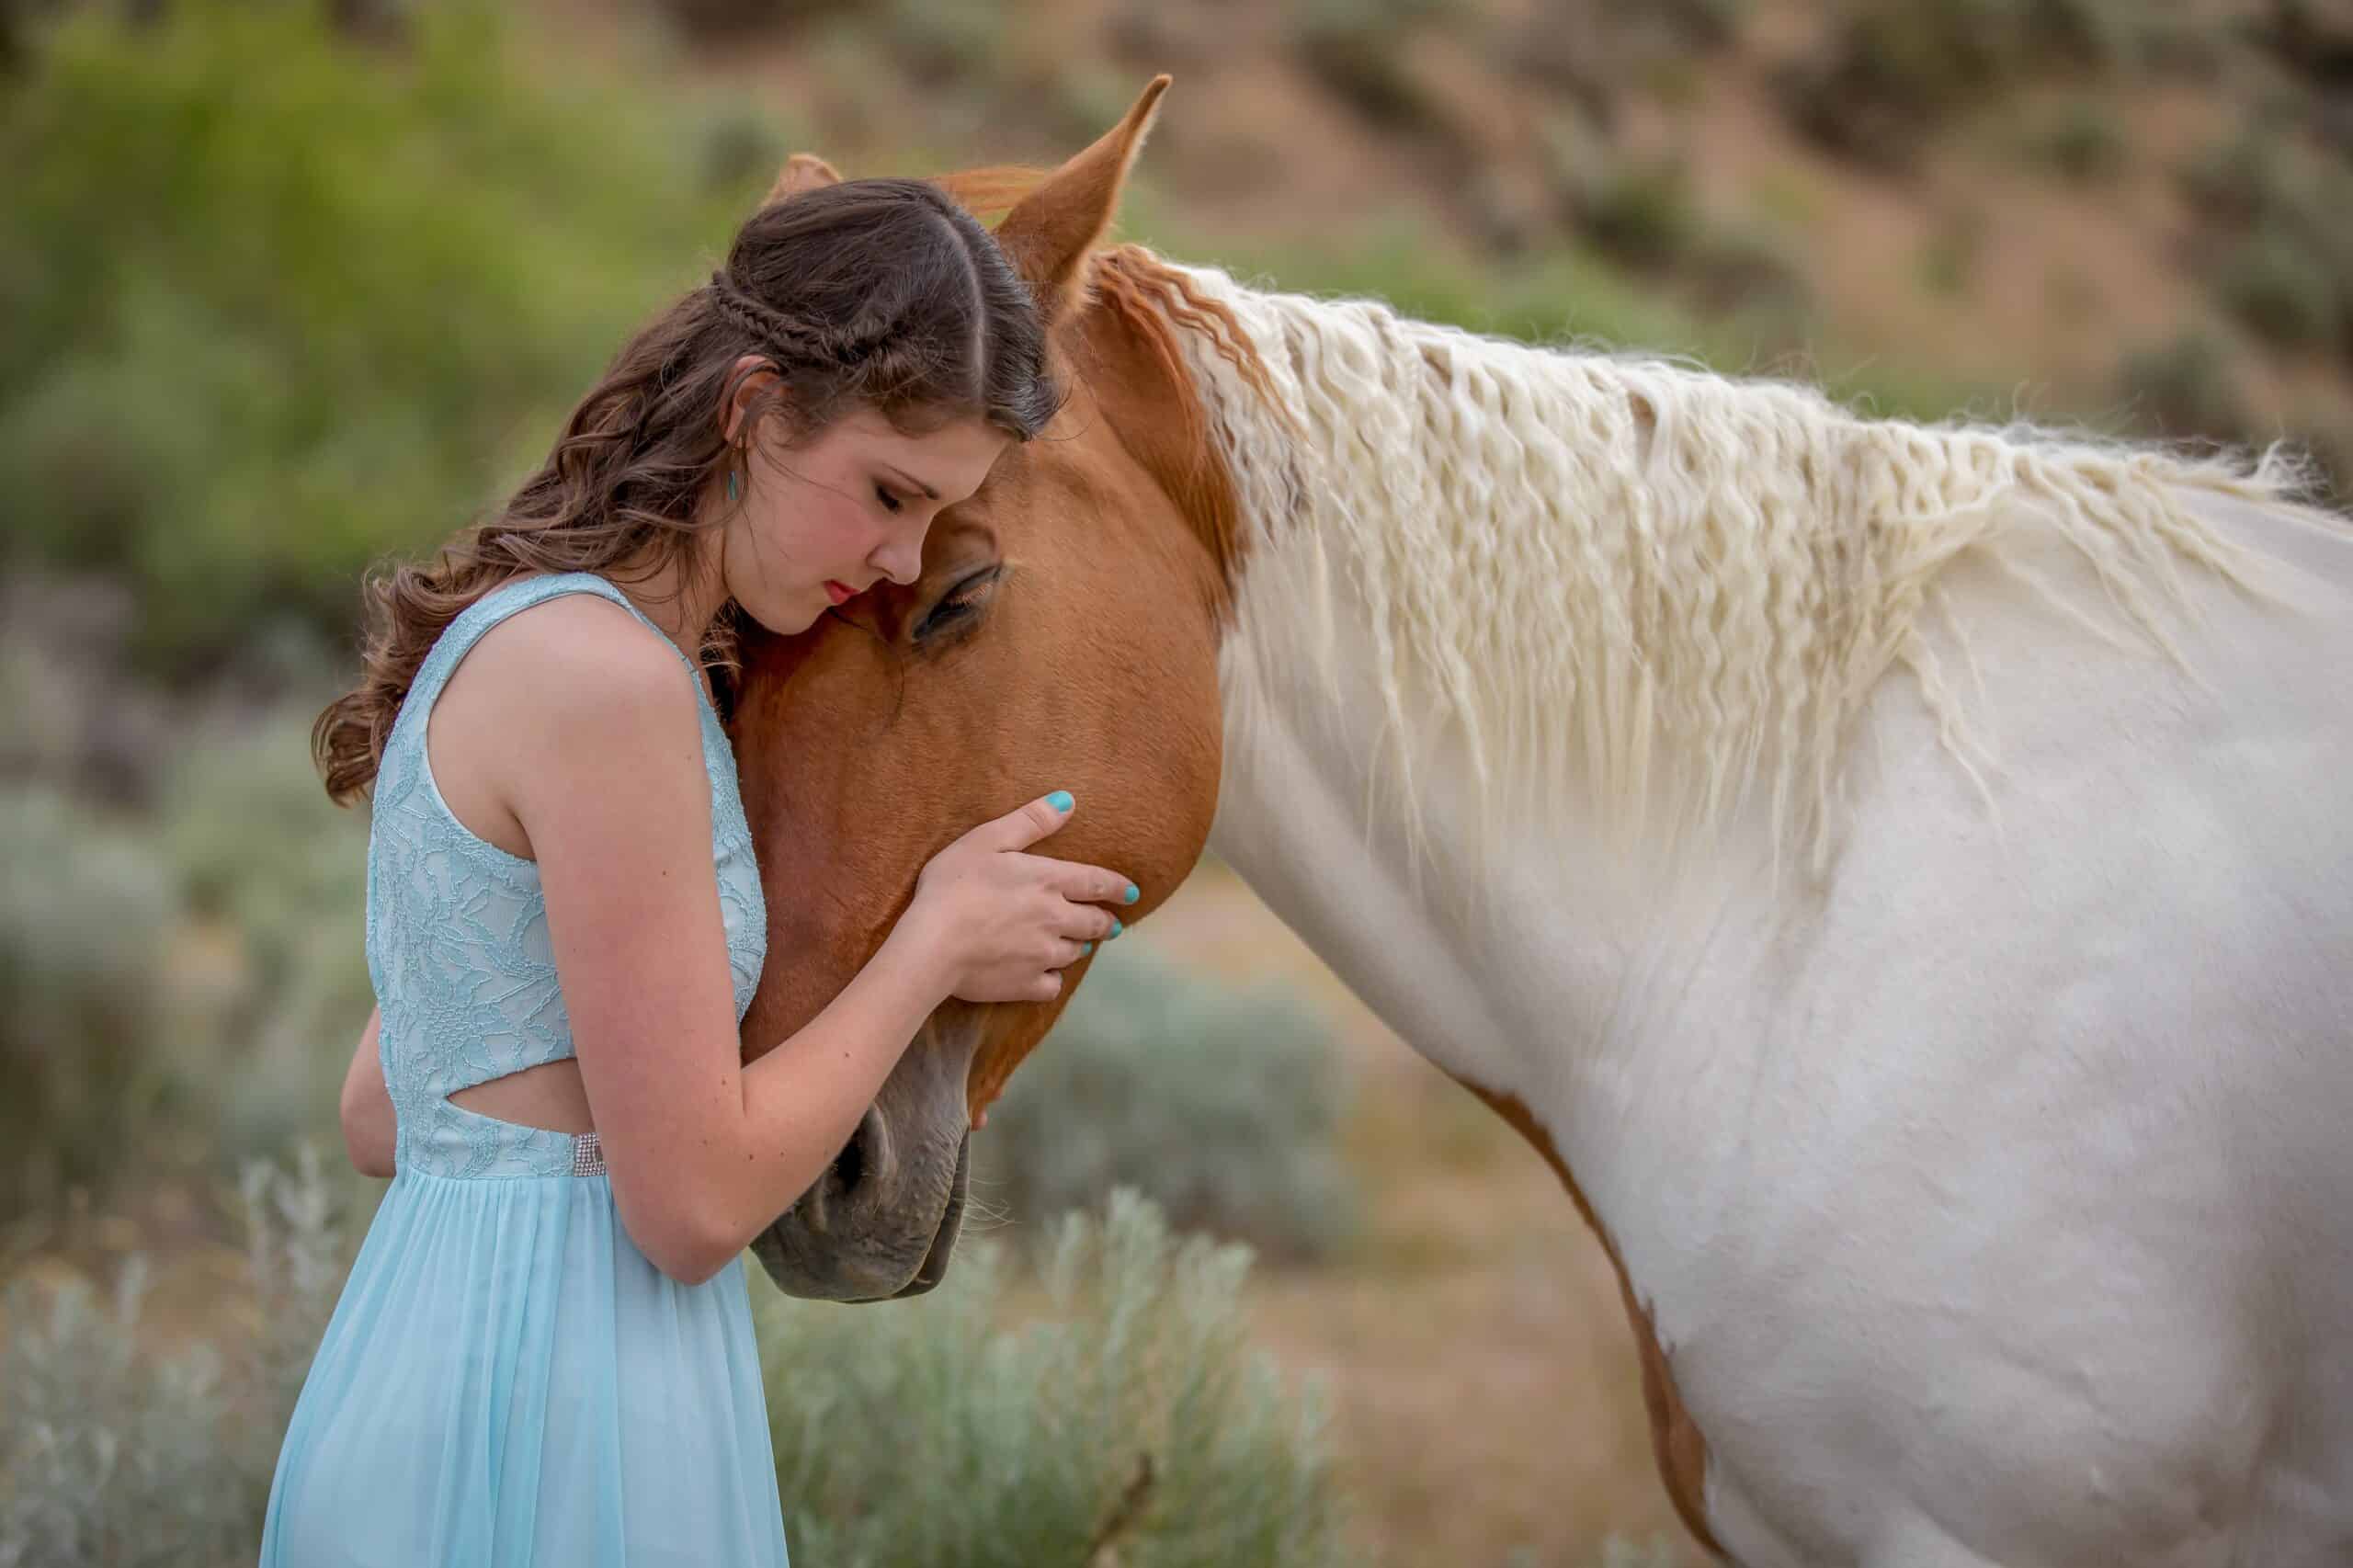 A young brown-haired woman, Kathryn Ribbens, embraces her brown and white horse. Photo provided by Kathryn Ribbens.